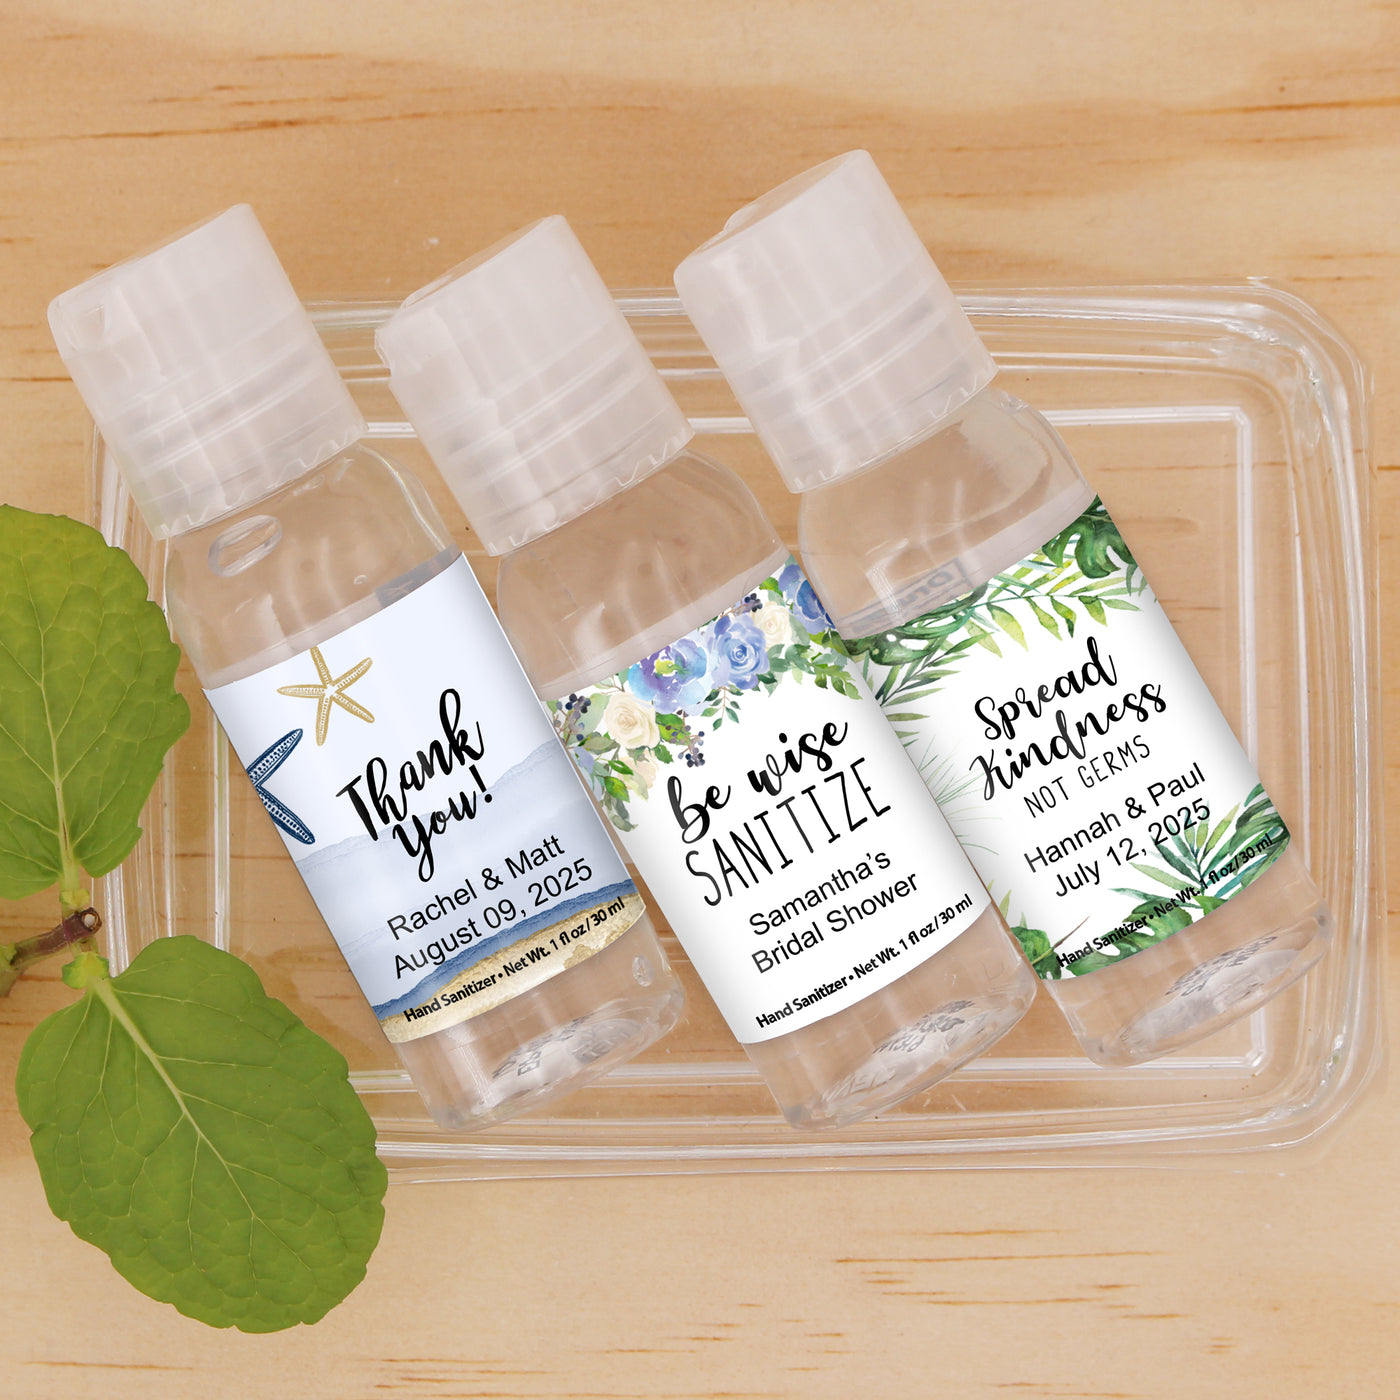 Floral & Botanicals Personalized Hand Sanitizers